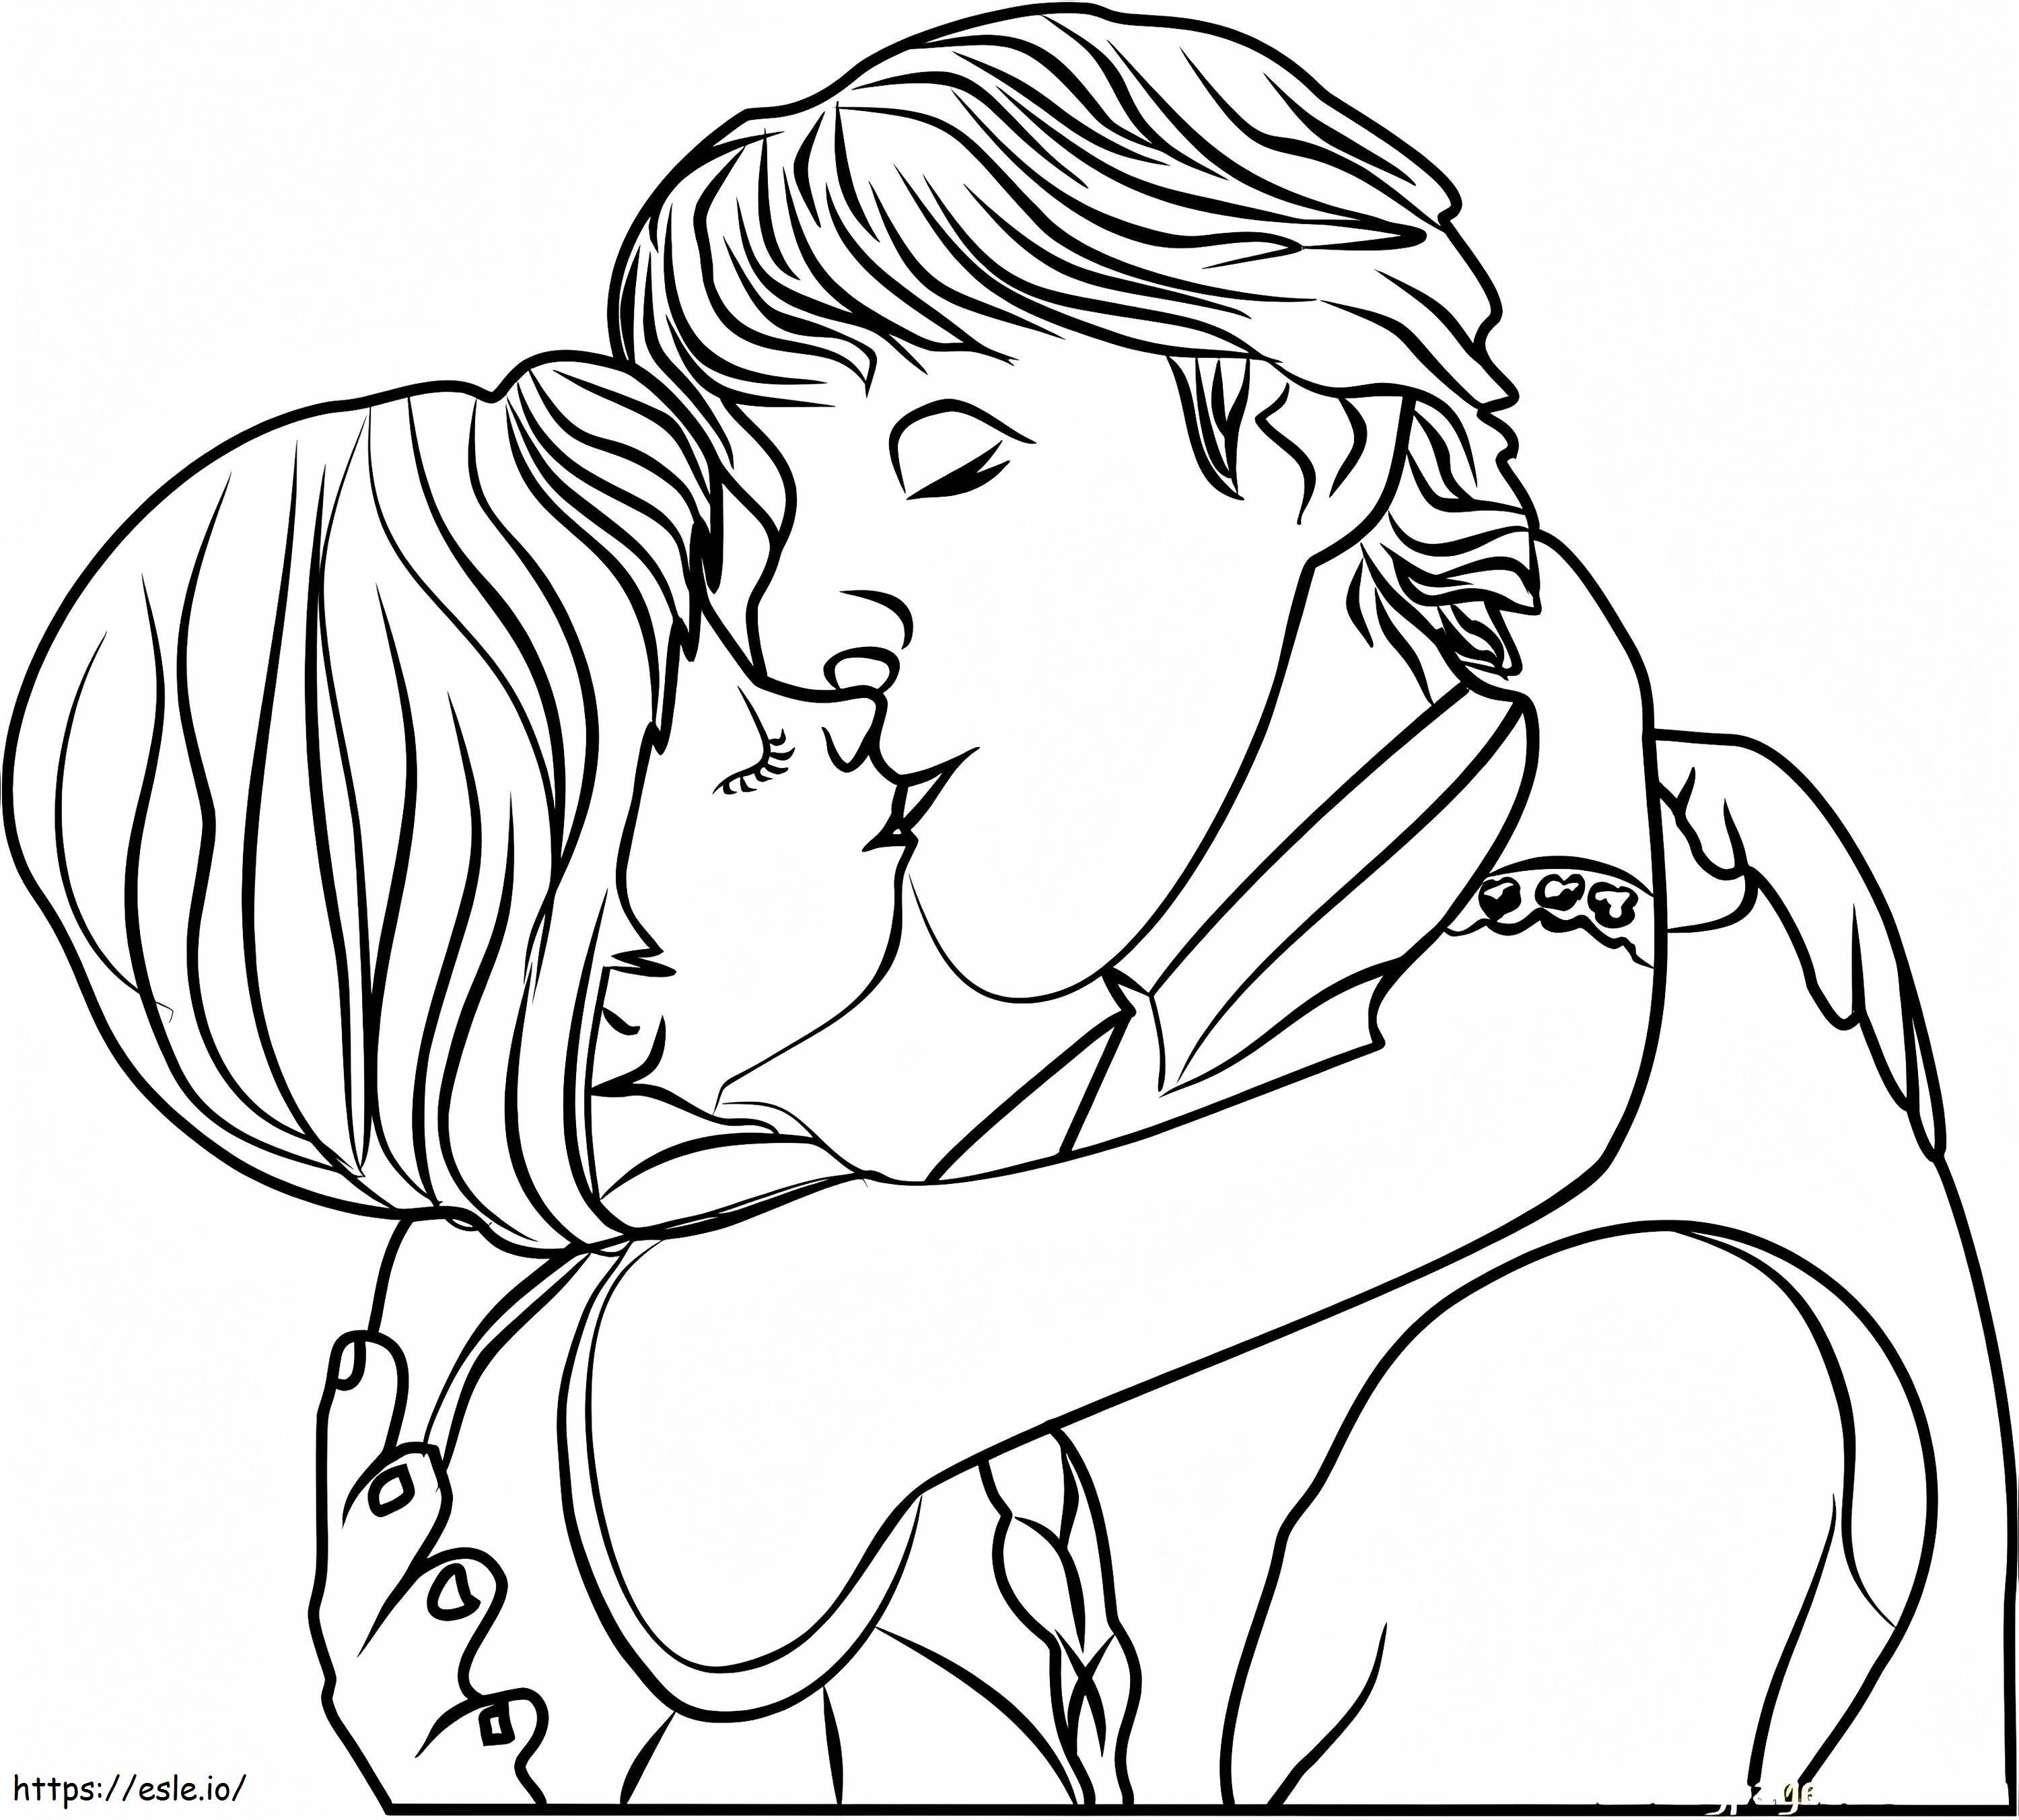 Kristoff And Anna Kiss coloring page